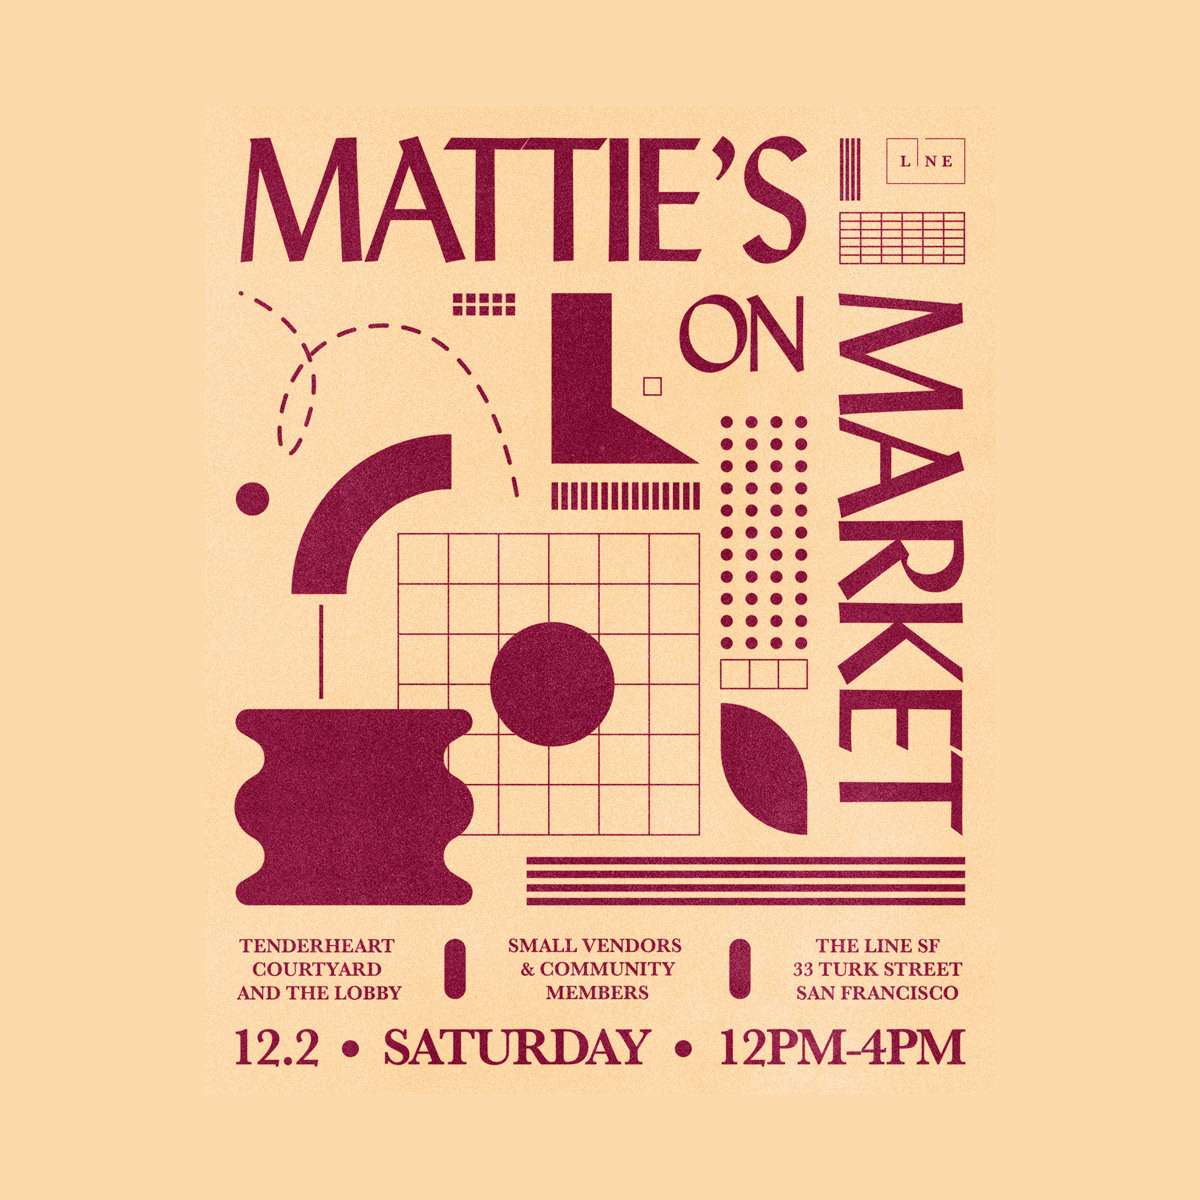 Brochure: 'MATTIE'S ON MARKET' displaying details, including text and operating hours.